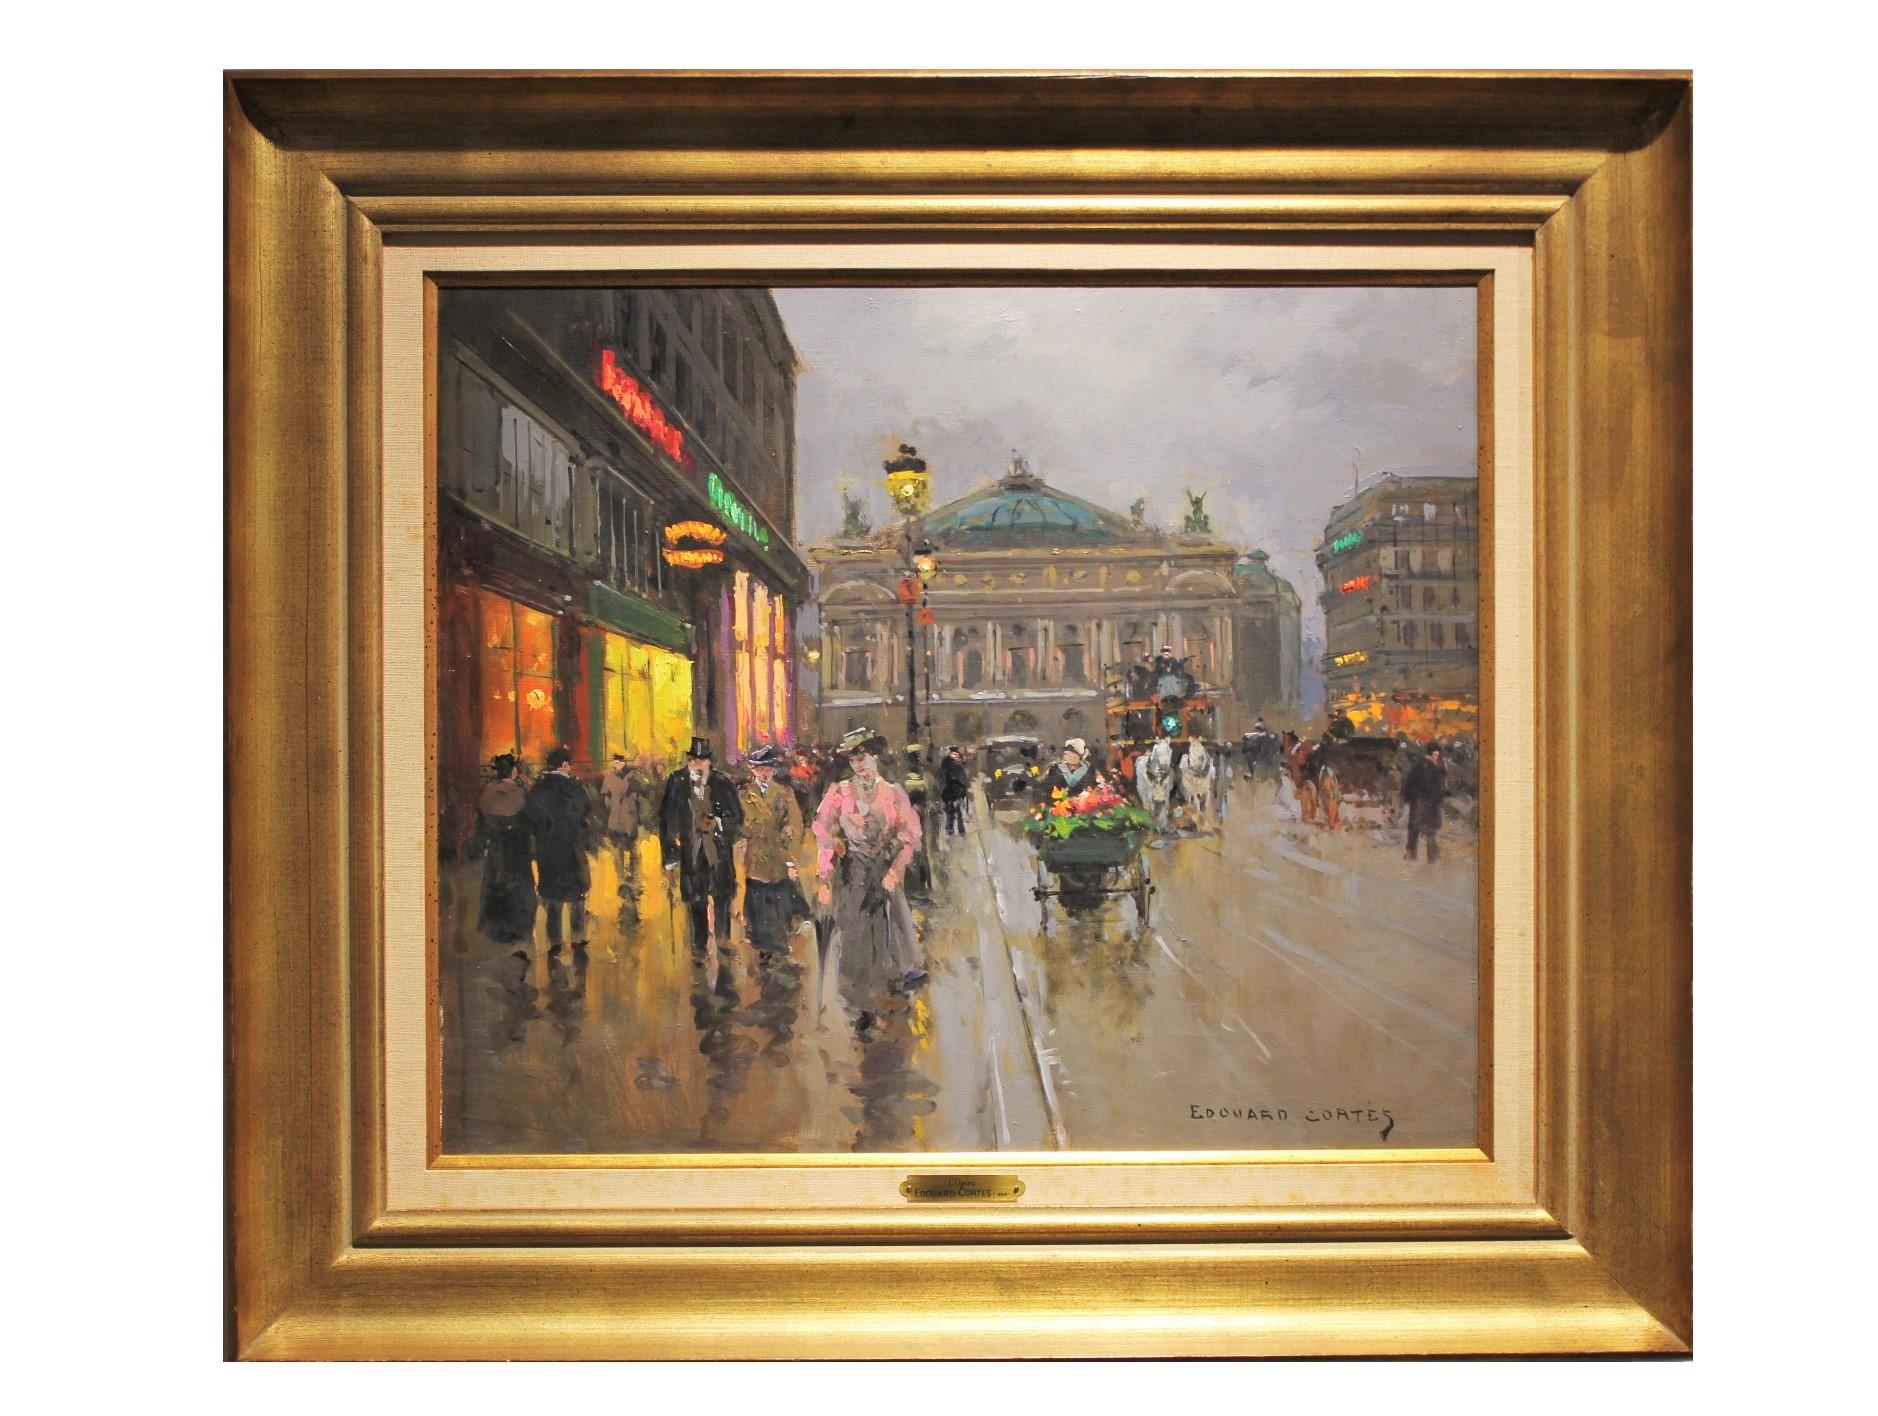 French impressionist cityscape of a busty street corner with figures walking in the direction of the viewer. The painting is attributed to Edouard Cortes and is signed in the bottom corner. The canvas is framed in a gold frame with a burlap matte.